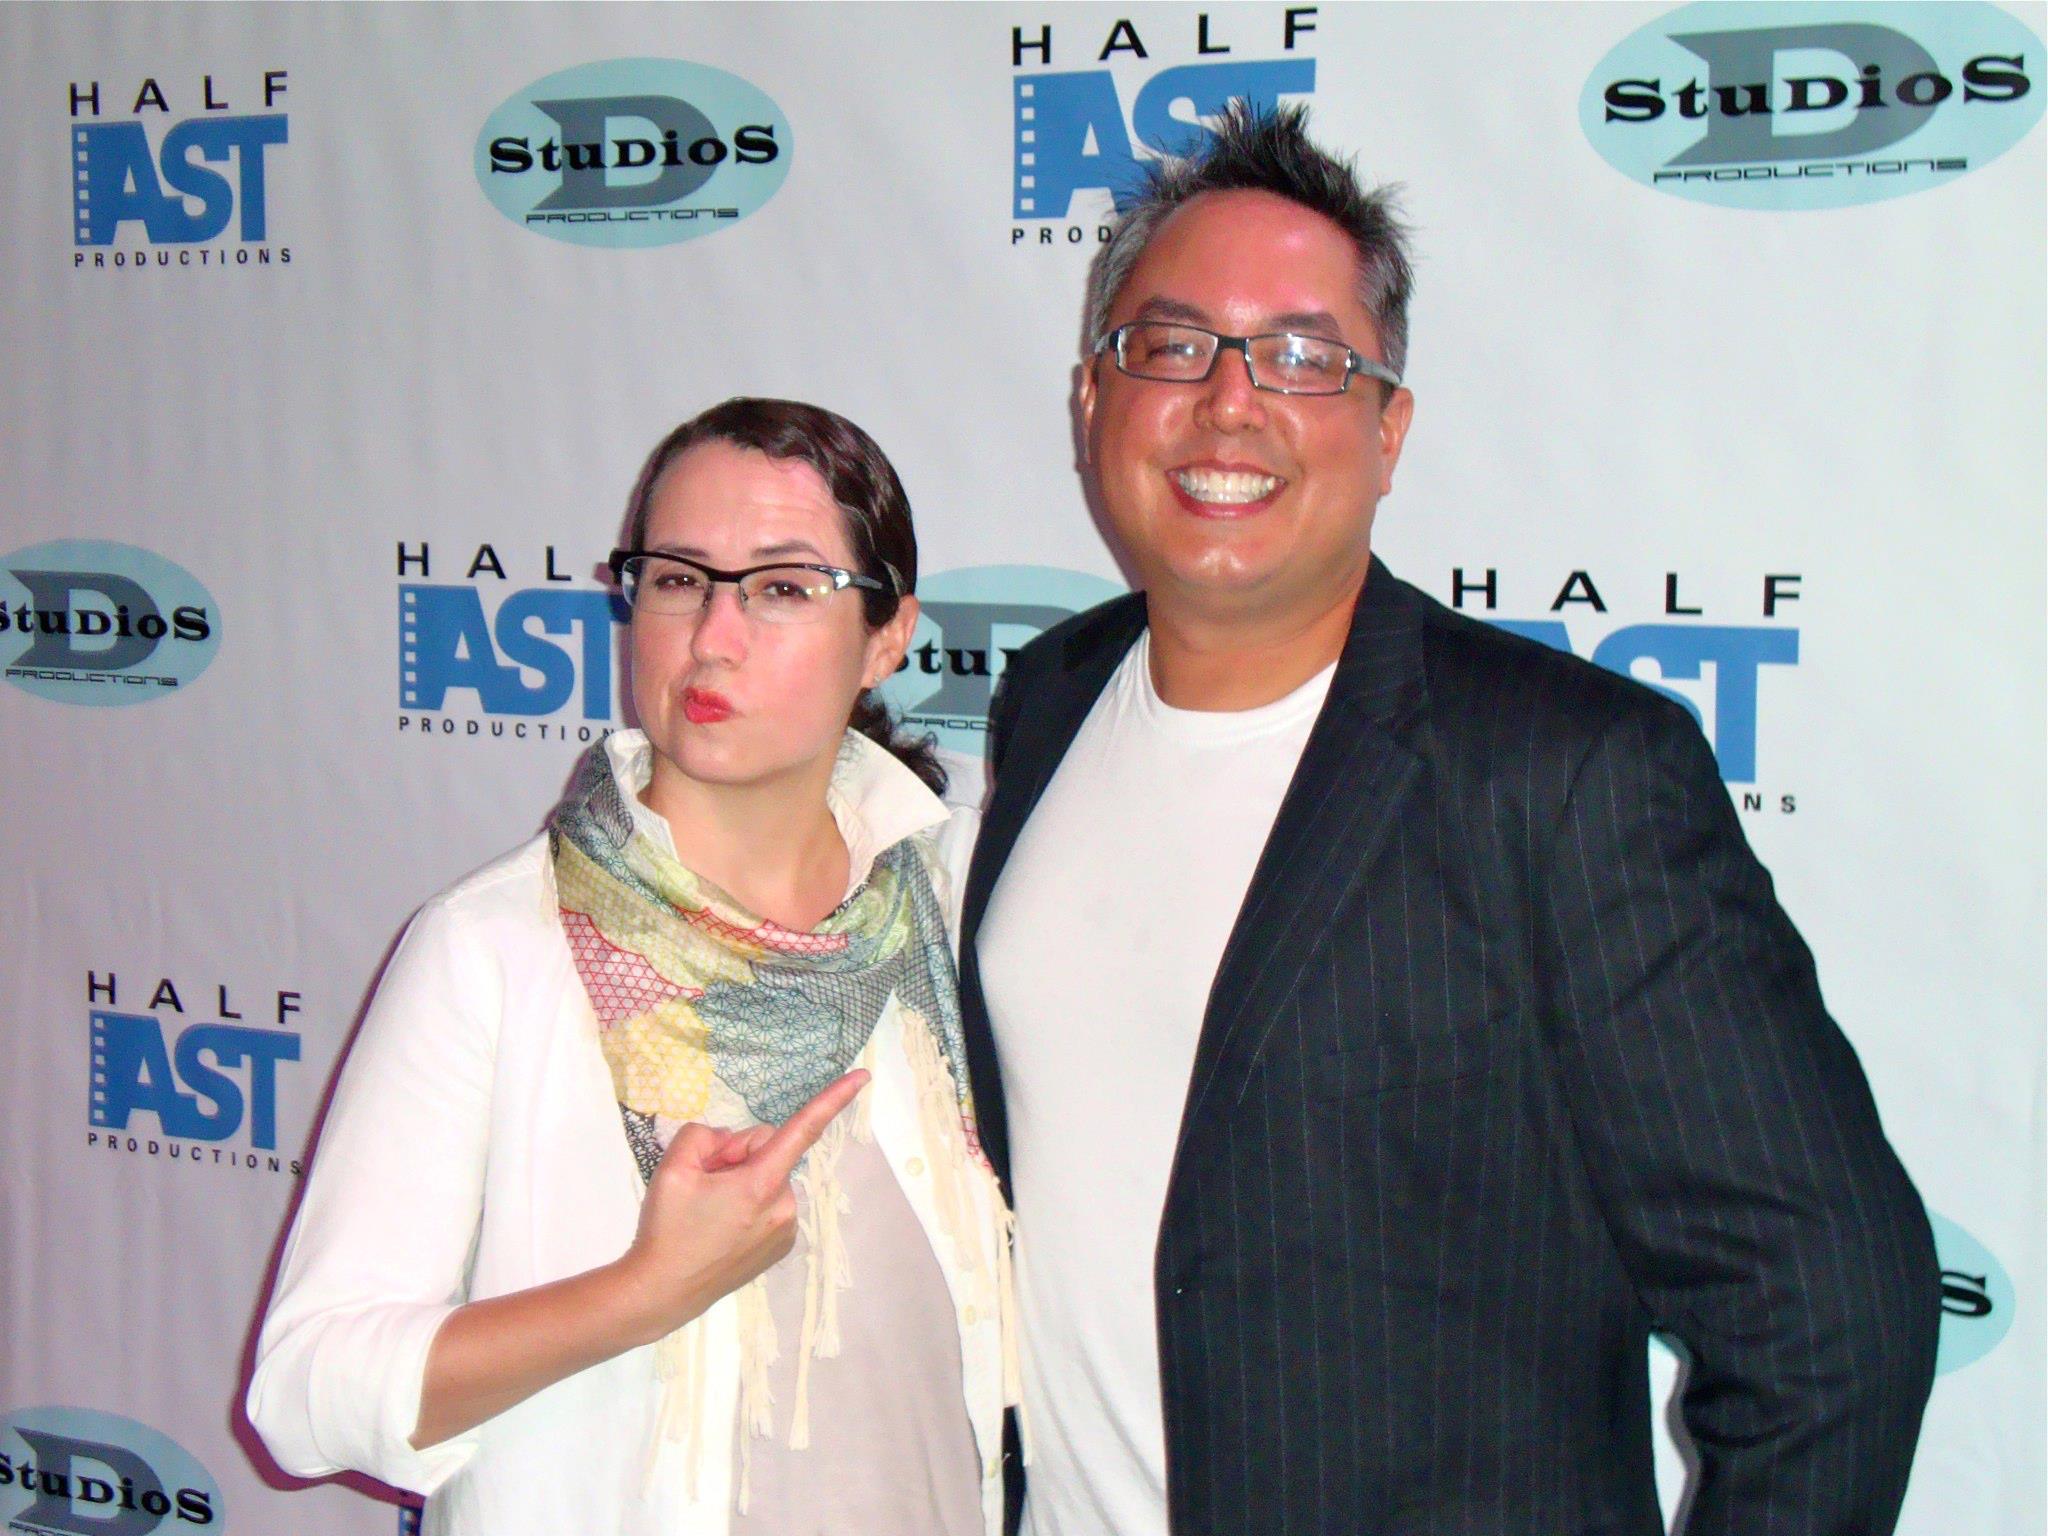 Adrianna Krikl and David Schatanoff, Jr. at the Claire cast and crew screening